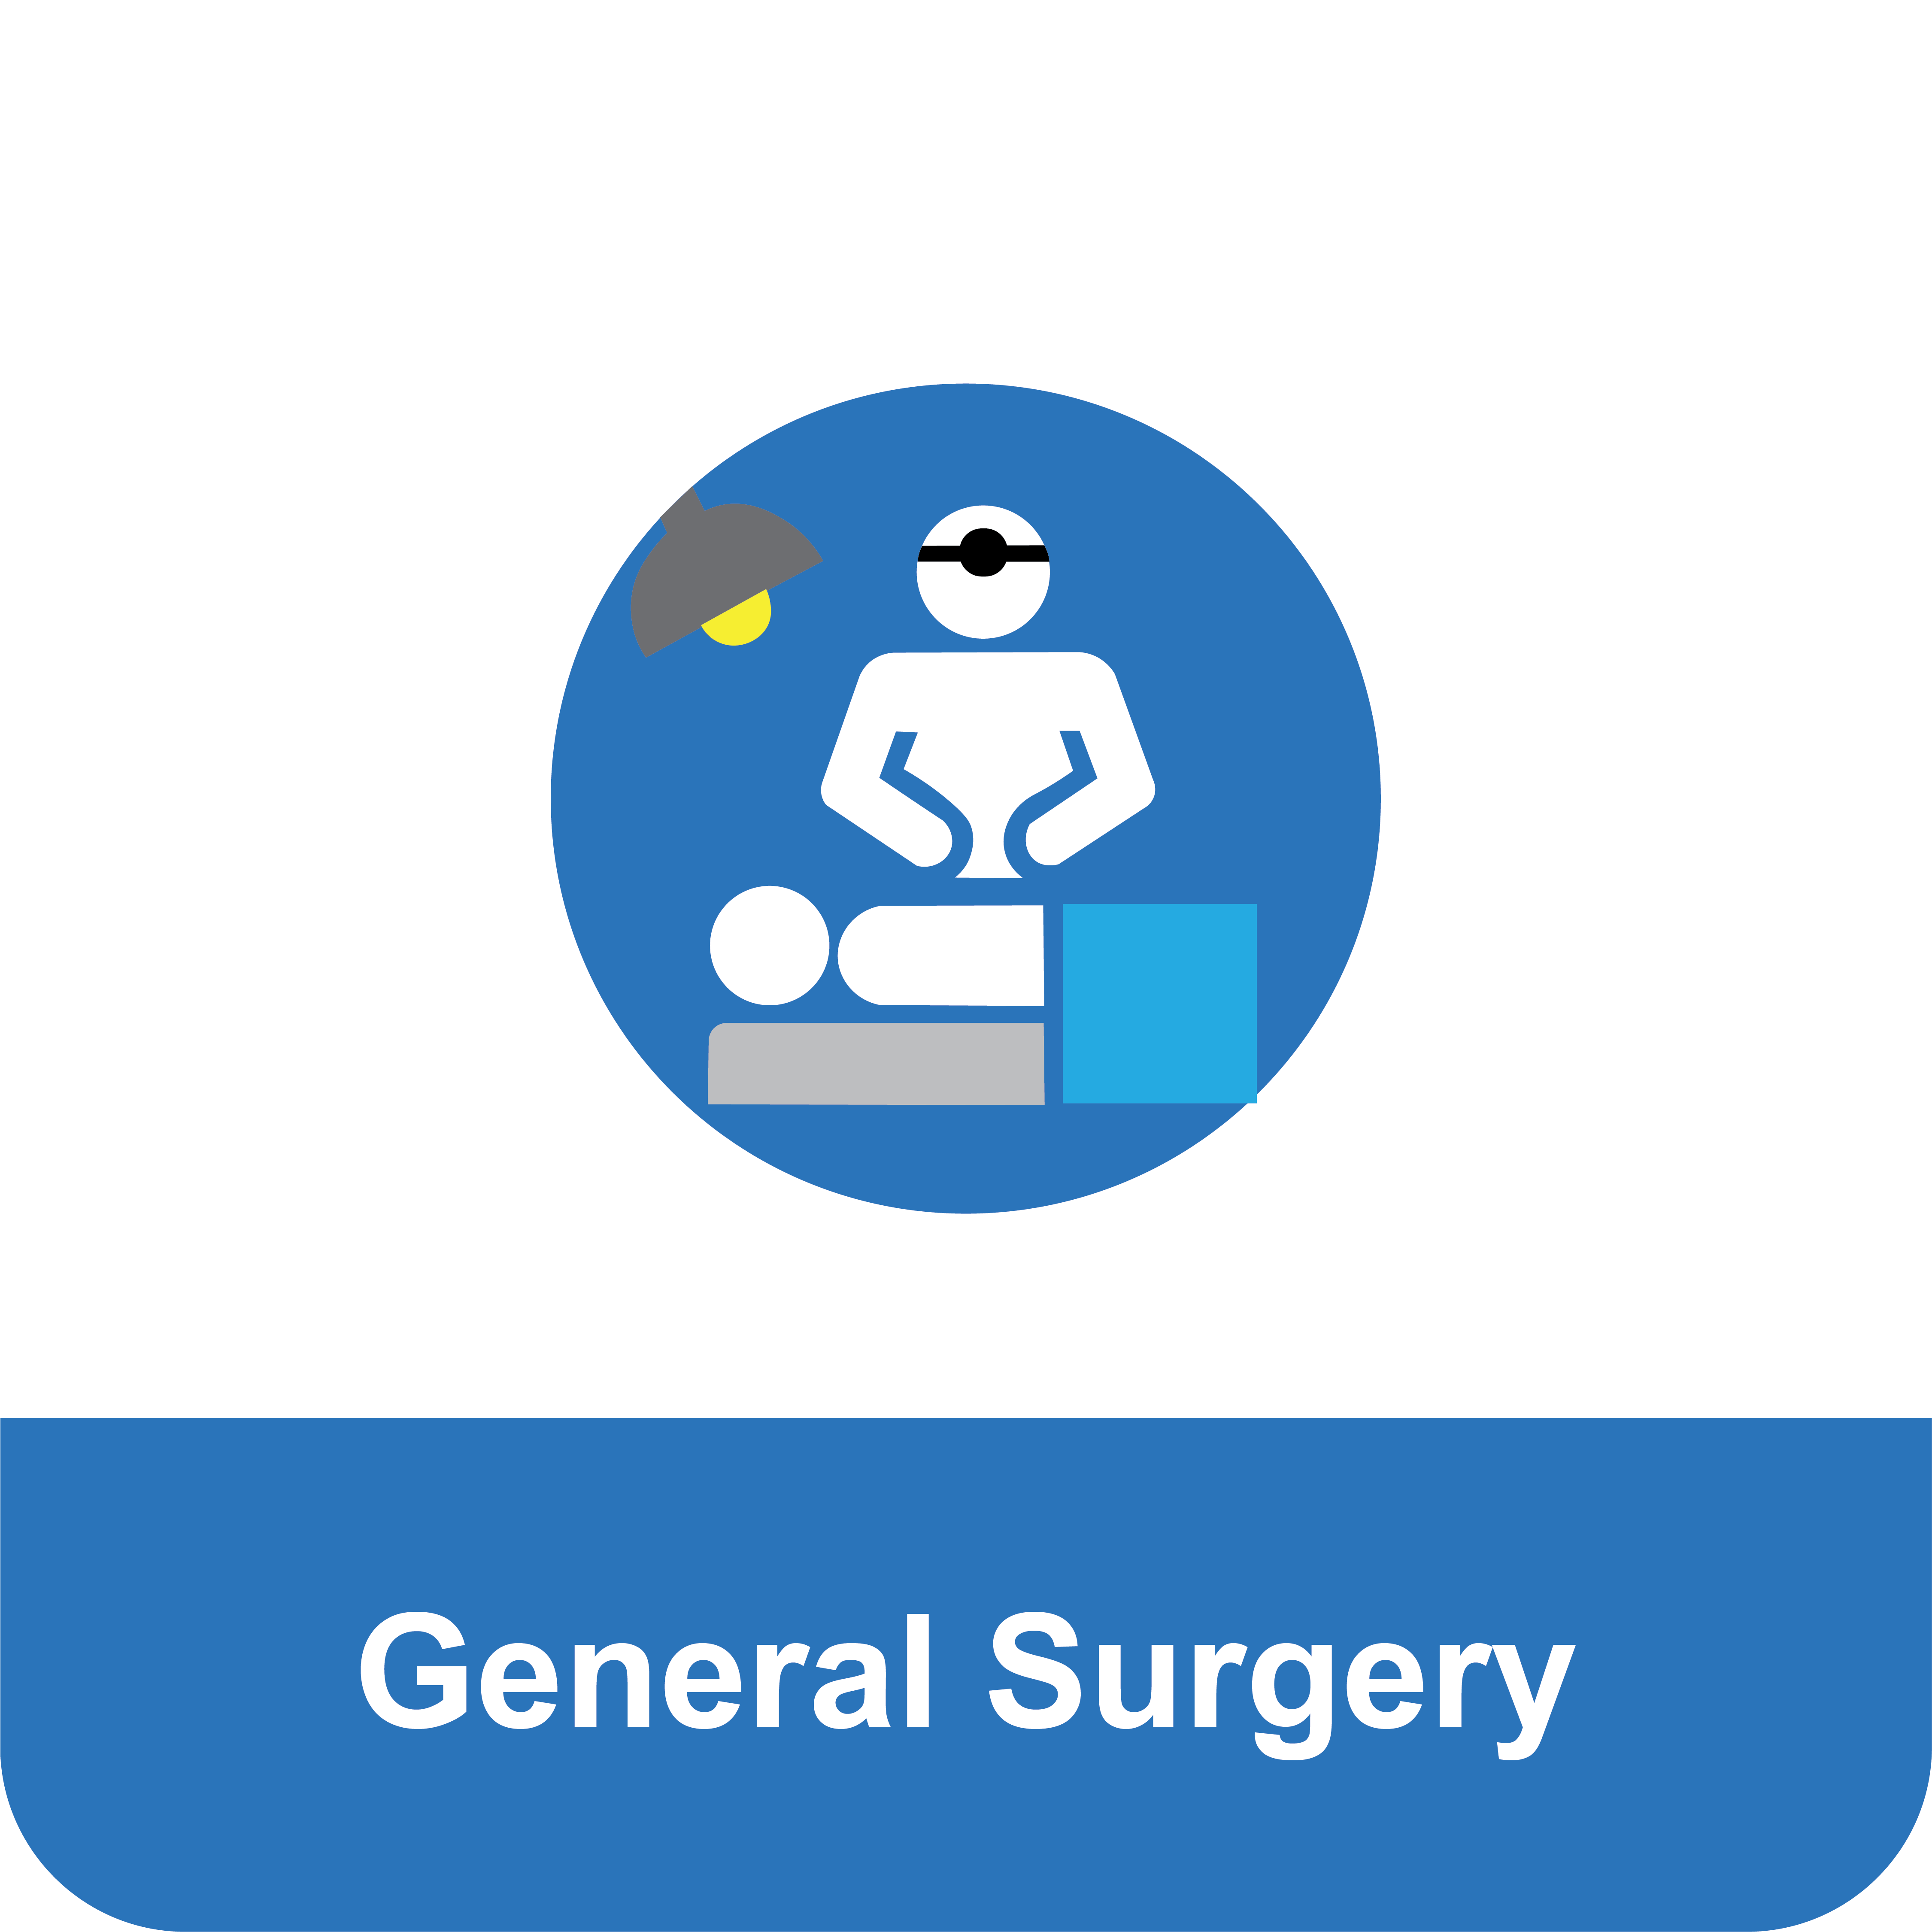 Tile that reads "General Surgery" under an icon of a doctor performing surgery on a patient.